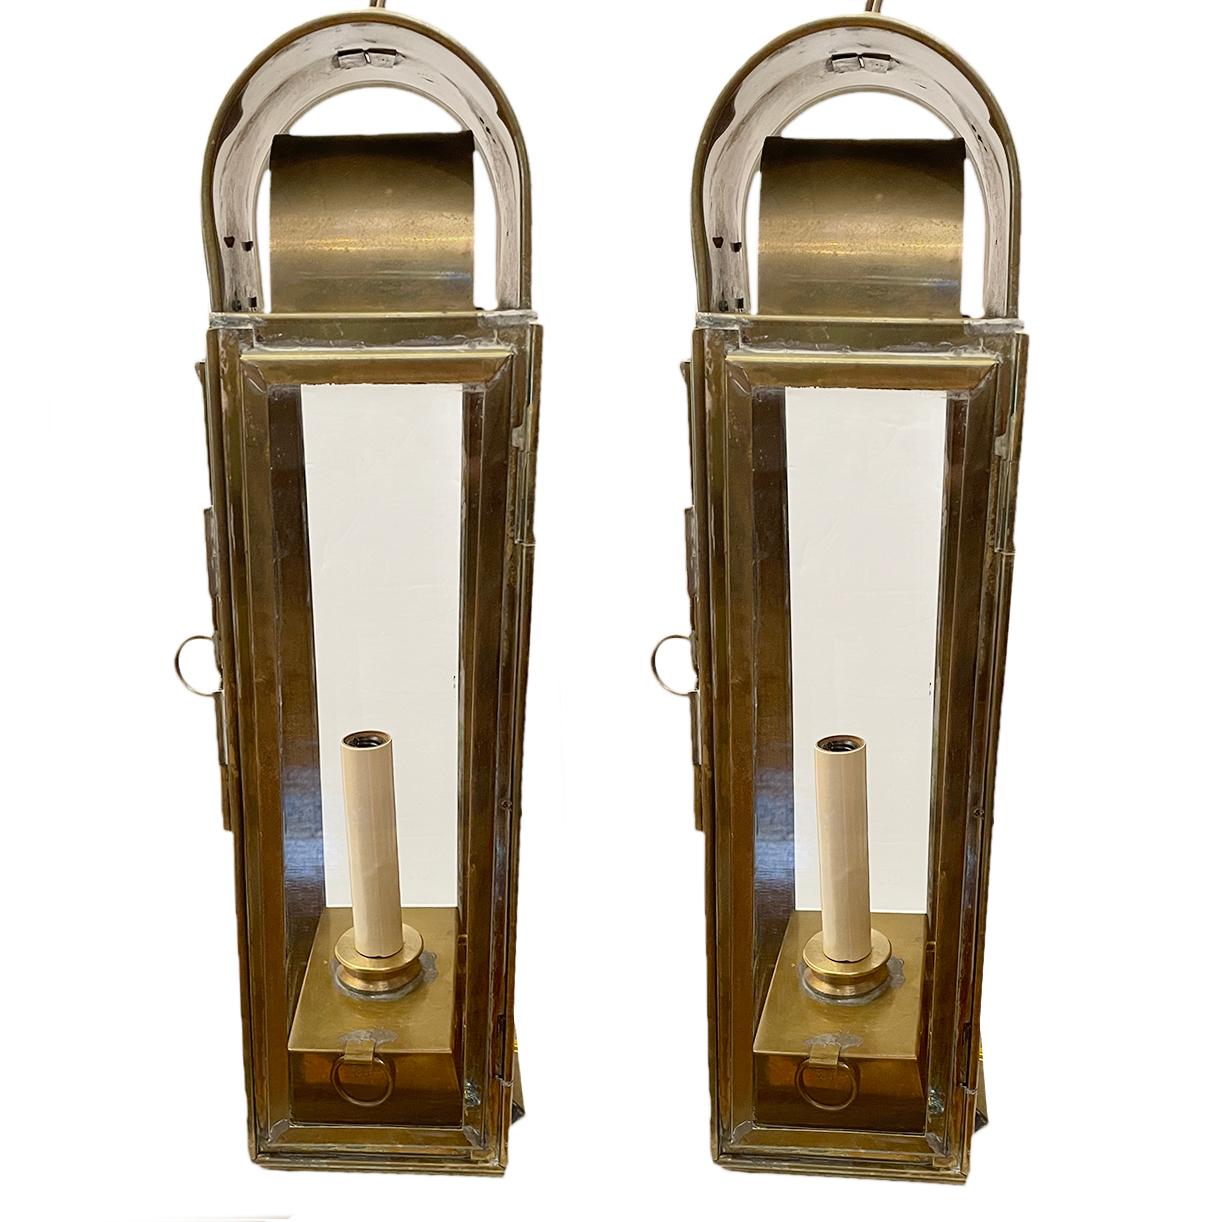 A pair of circa 1920's patinated brass lantern sconces with one interior light.

Measurements:
Height: 18.5